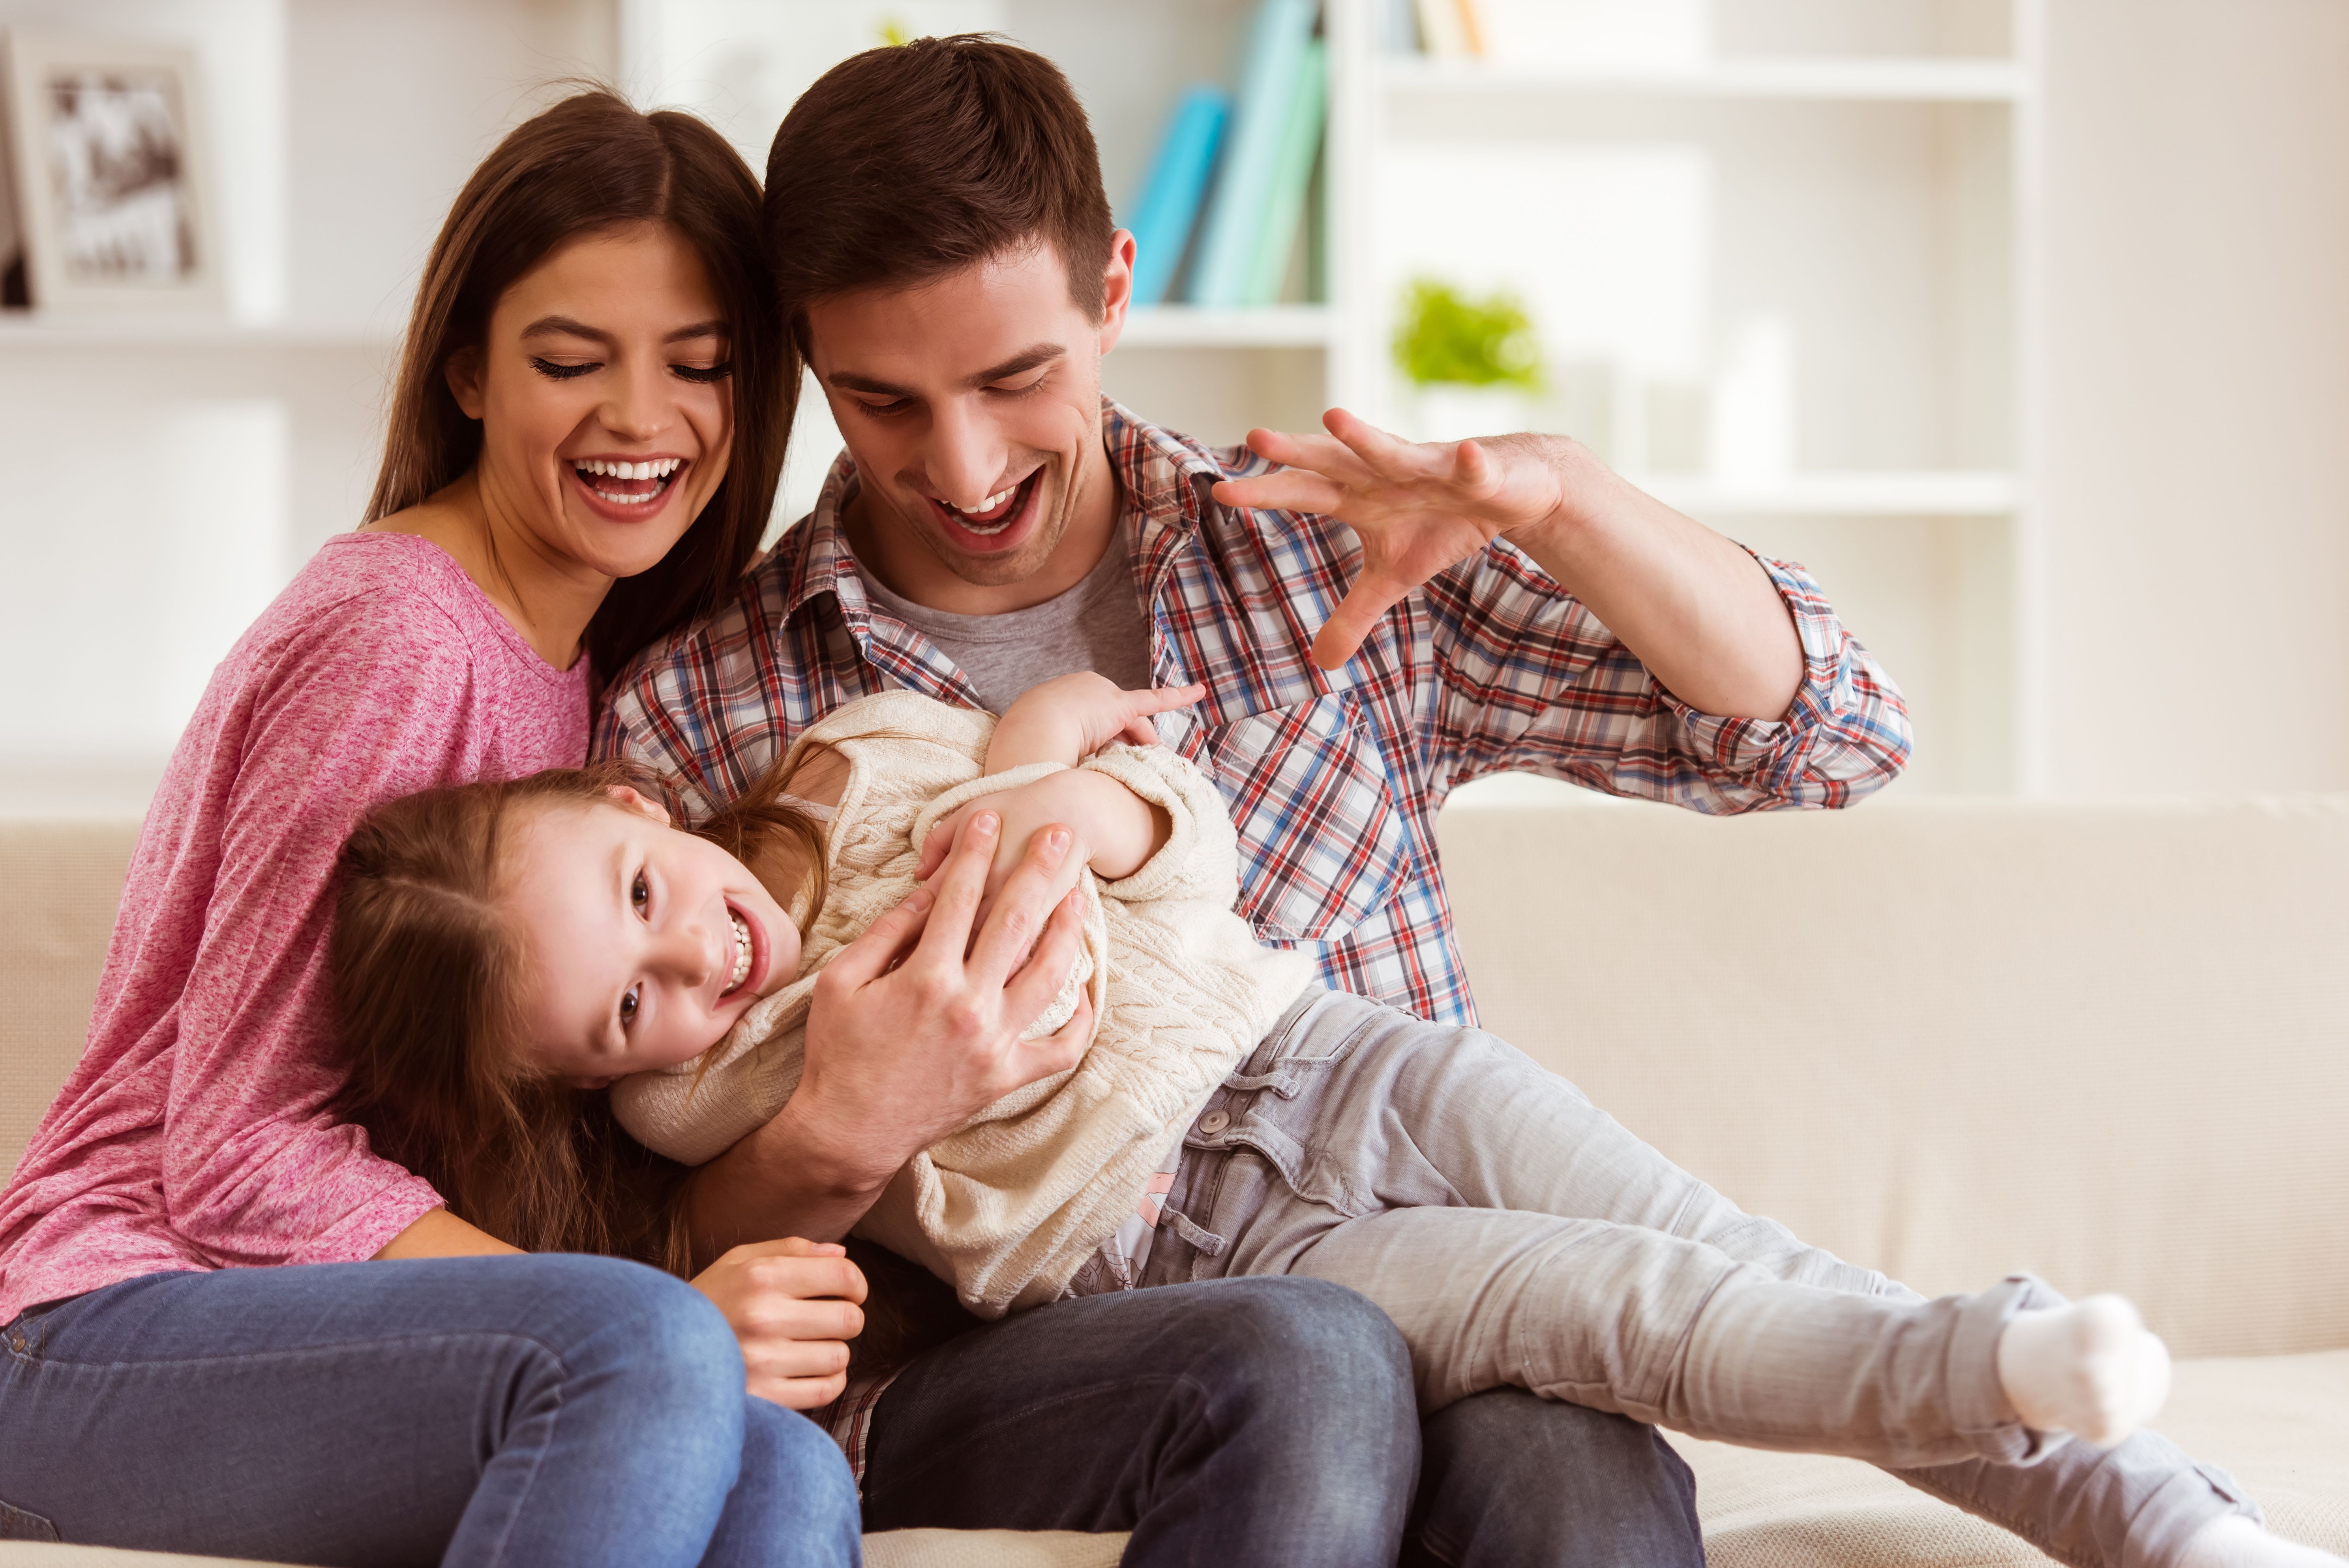 Smiling young parents and their child playing together at home | Photo: Shutterstock/VGstockstudio